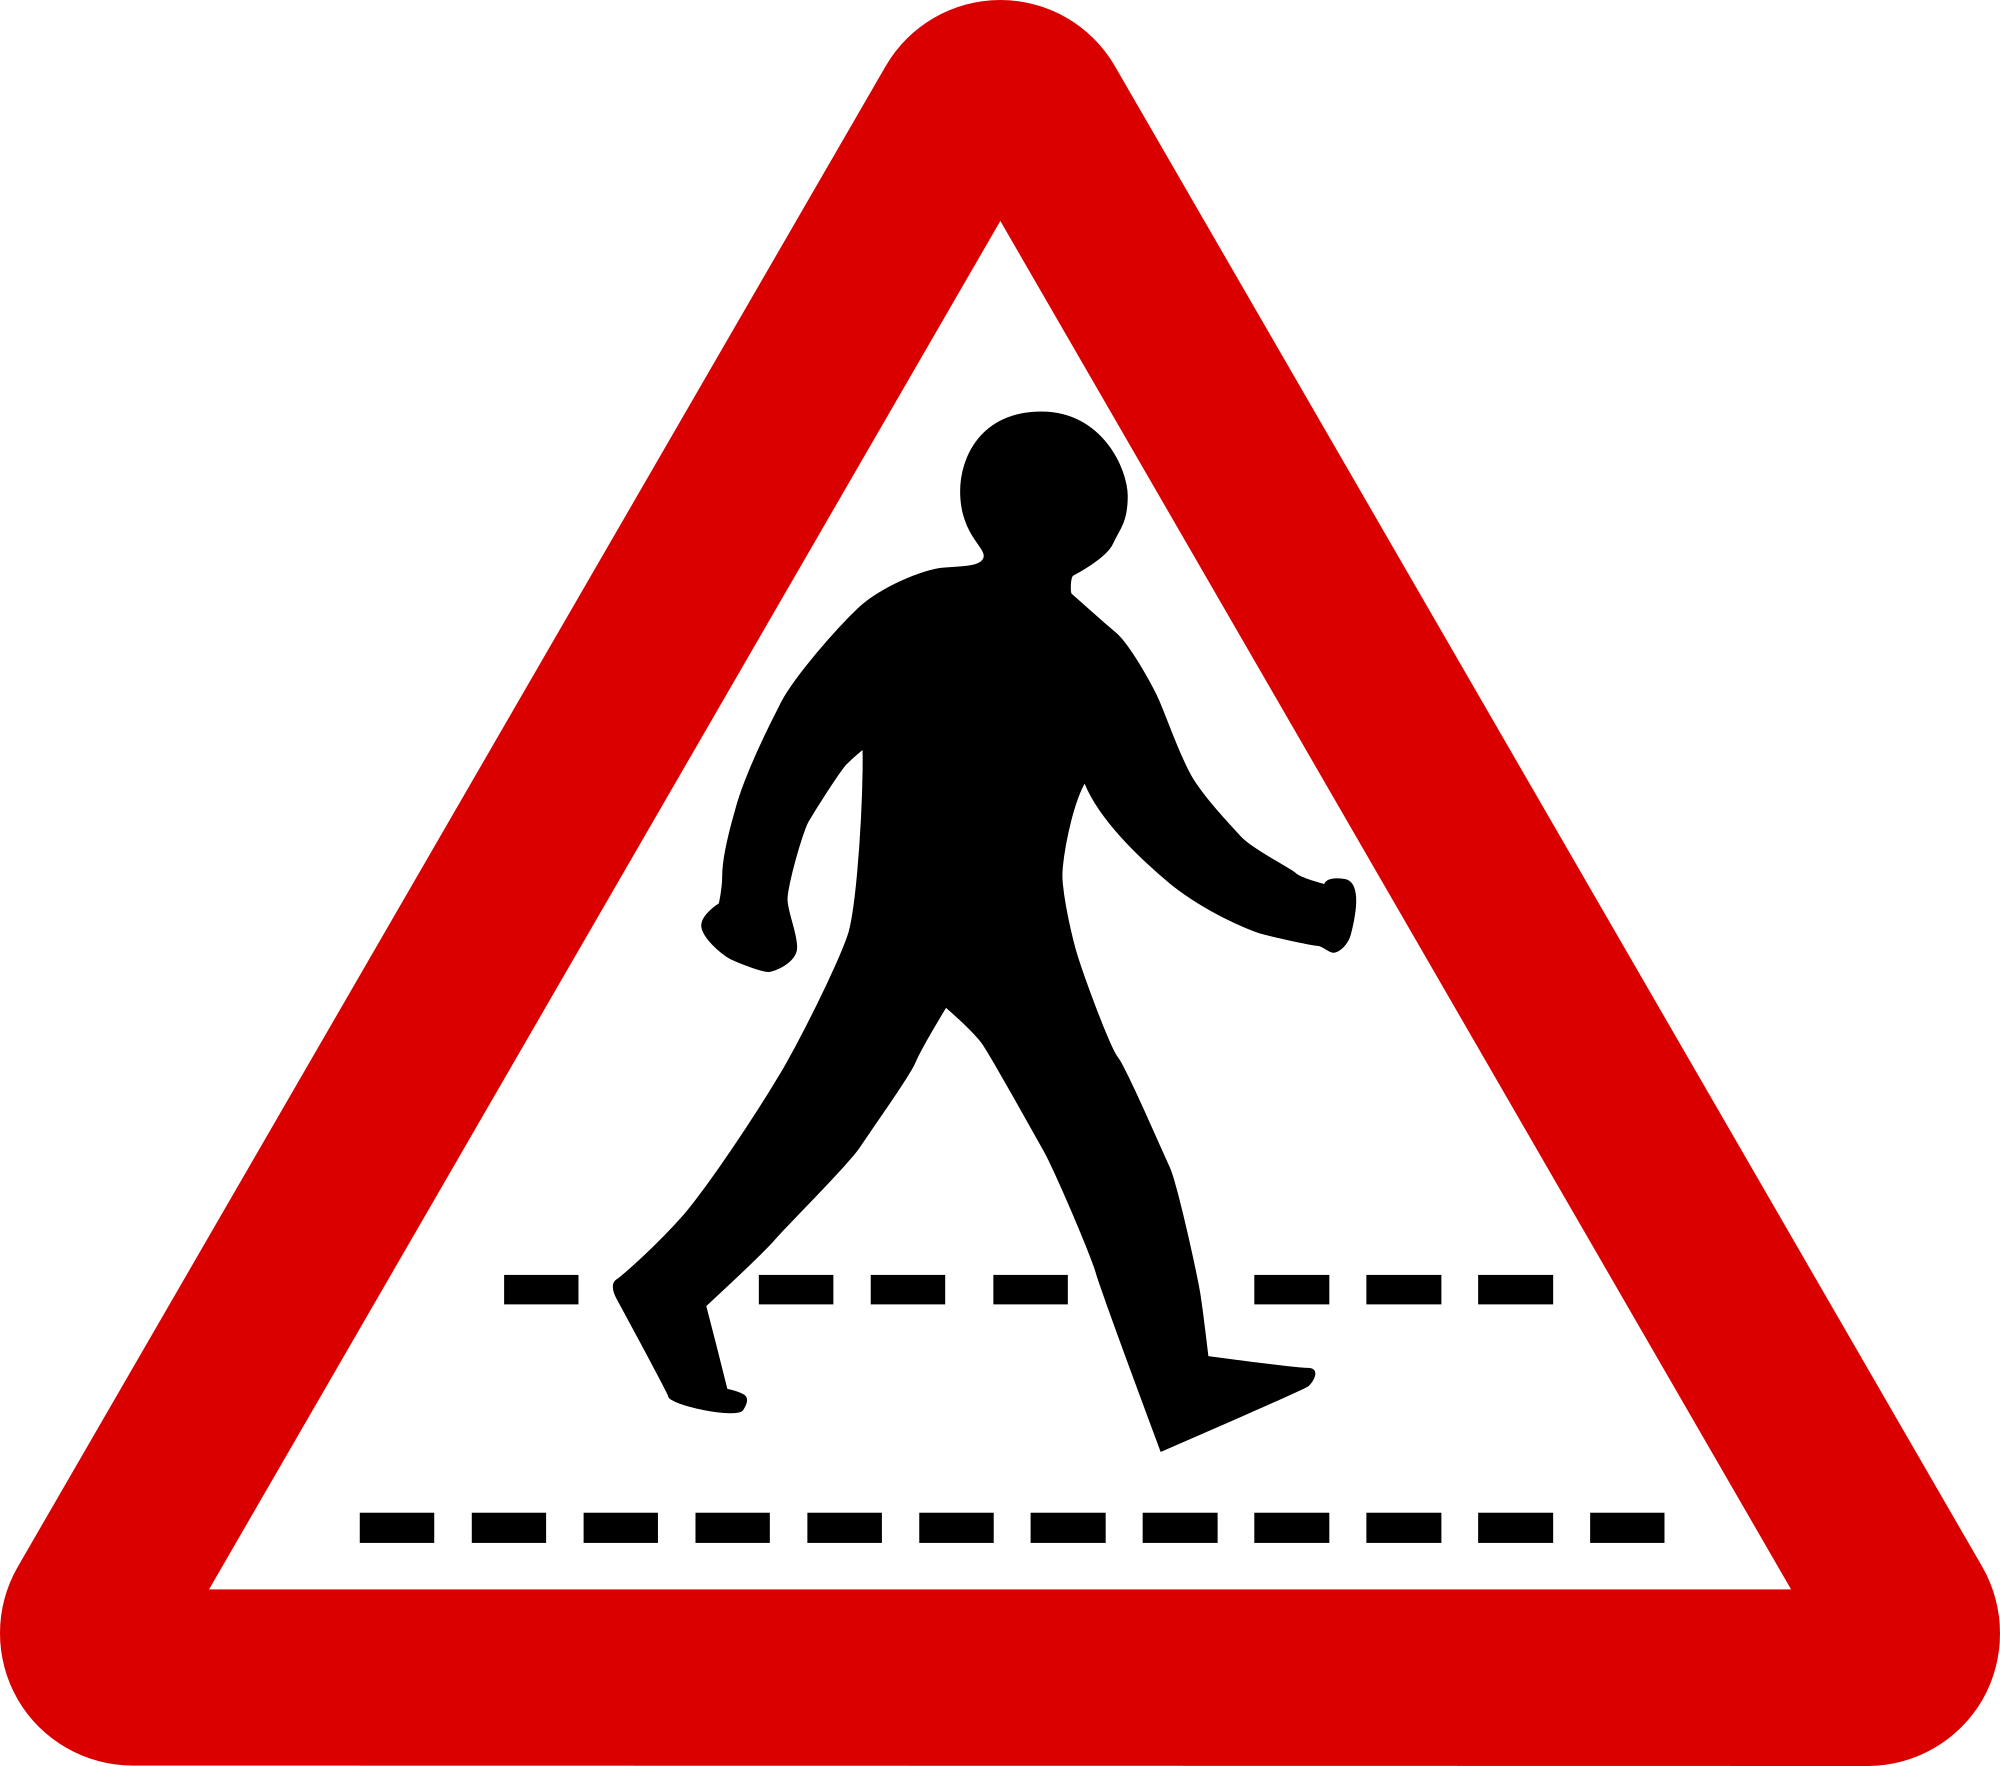 File:Mauritius Road Signs - Warning Sign - Pedestrian Crossing.svg ...